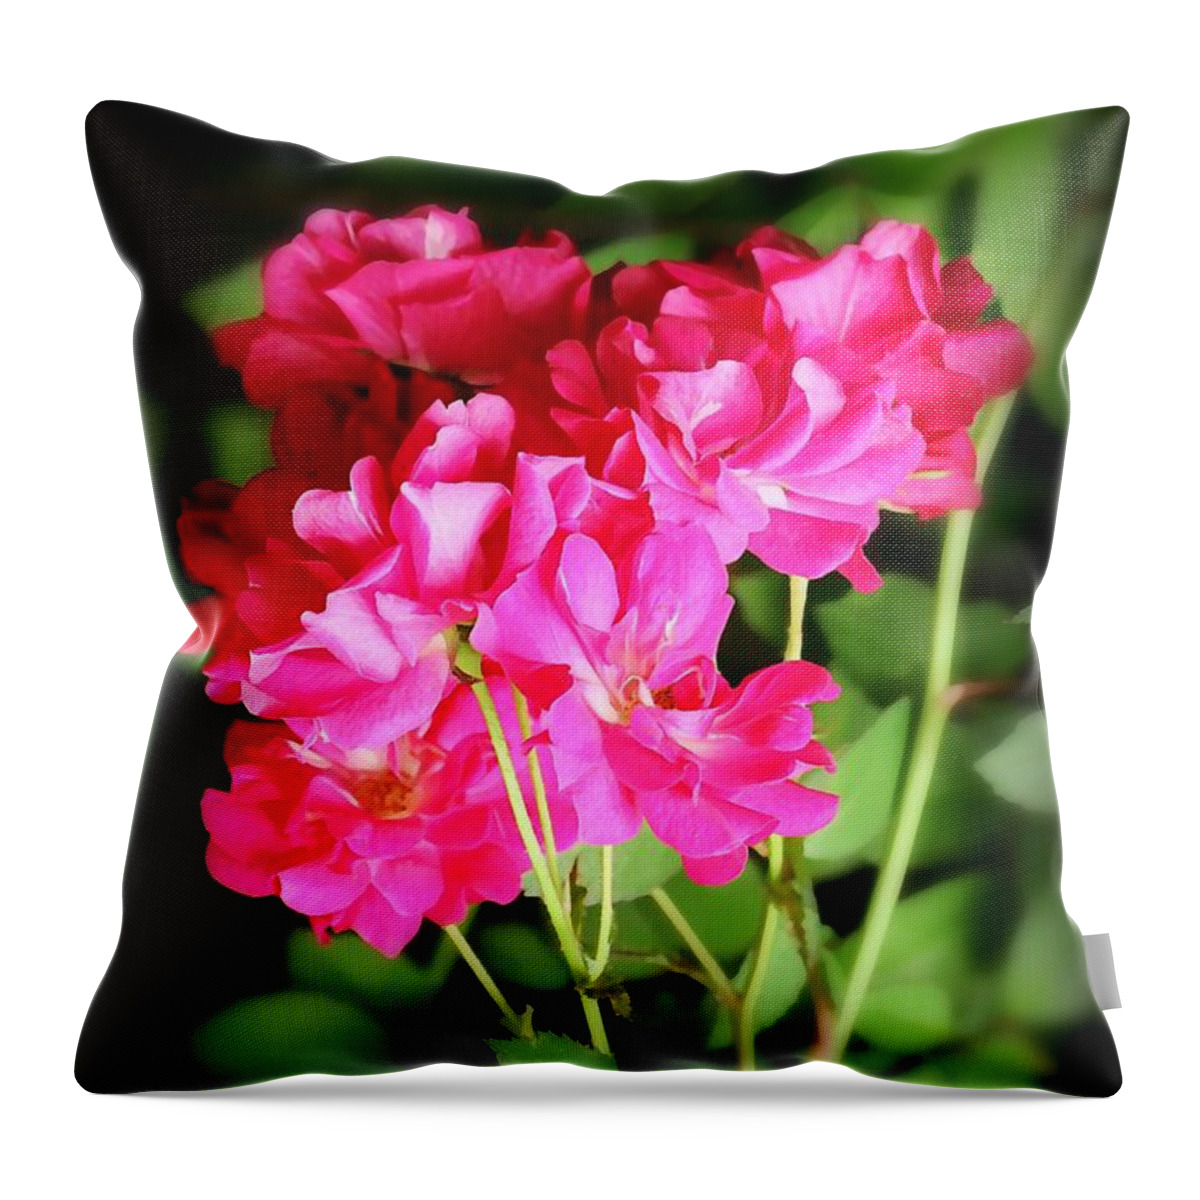 Wild Roses Throw Pillow featuring the photograph Wild Roses by Jean Connor